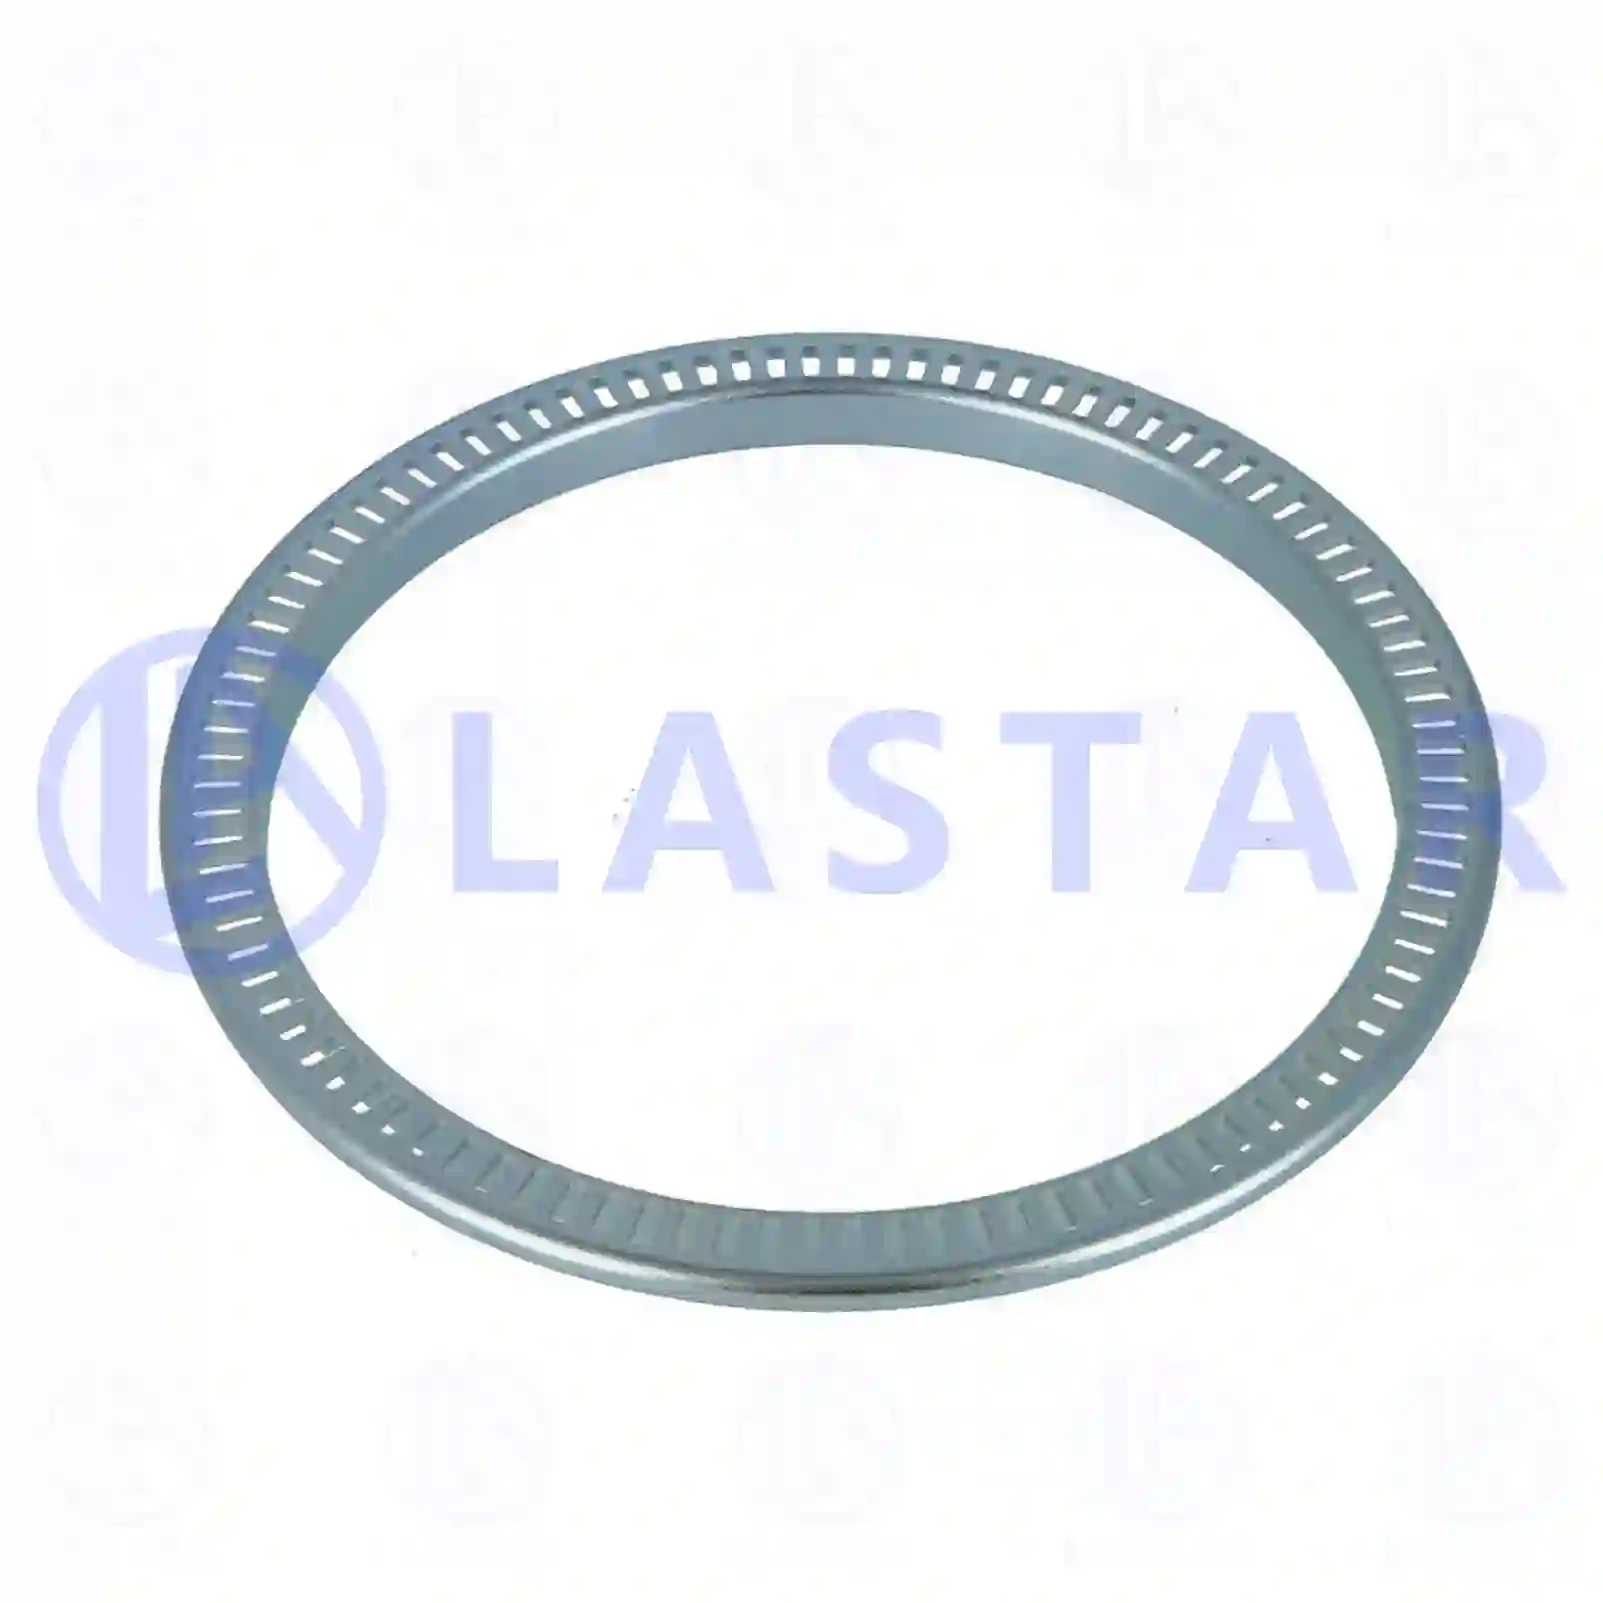 ABS ring, 77726294, 9423340015, 0003340215, 9423340015, 9423340115, ZG50009-0008 ||  77726294 Lastar Spare Part | Truck Spare Parts, Auotomotive Spare Parts ABS ring, 77726294, 9423340015, 0003340215, 9423340015, 9423340115, ZG50009-0008 ||  77726294 Lastar Spare Part | Truck Spare Parts, Auotomotive Spare Parts